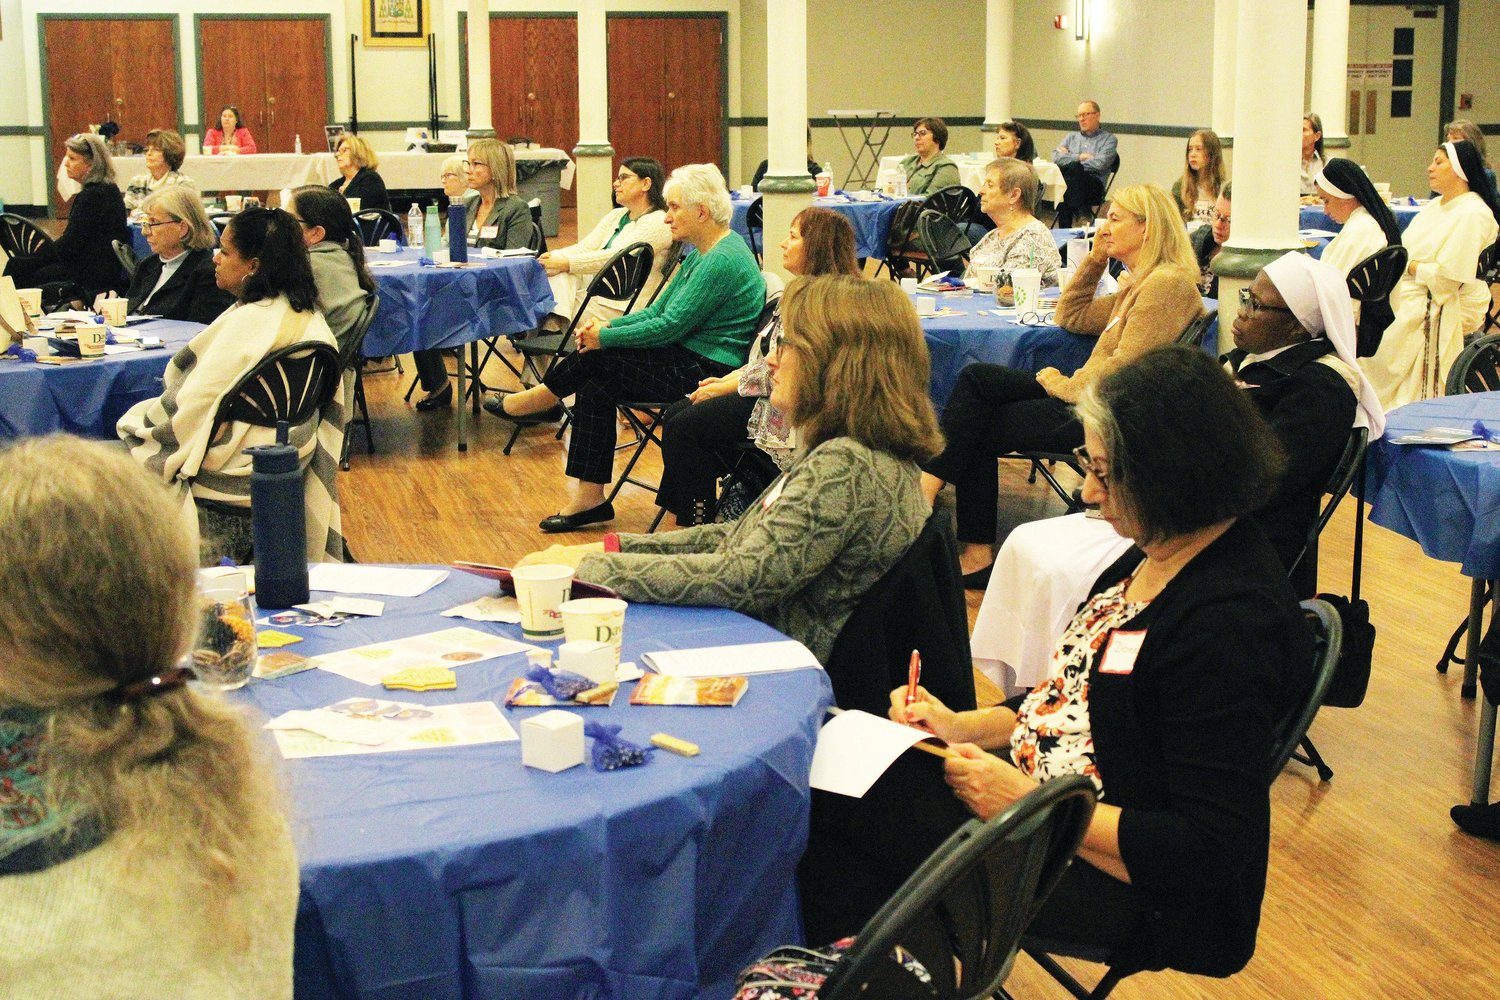 The Rhode Island Catholic Women’s Conference took place on Saturday, Nov. 5, at the Cathedral of Saints Peter and Paul.